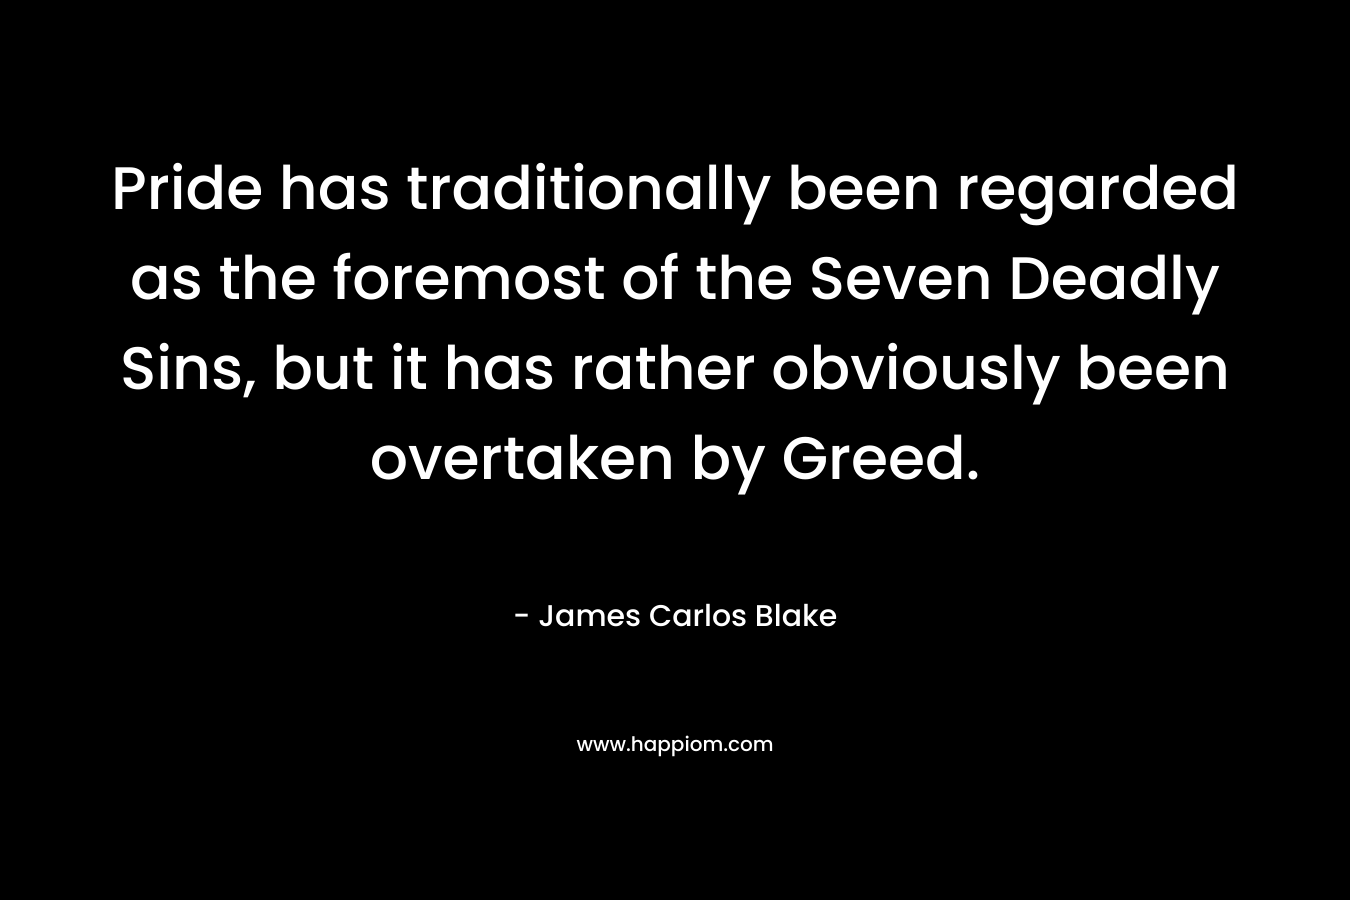 Pride has traditionally been regarded as the foremost of the Seven Deadly Sins, but it has rather obviously been overtaken by Greed.